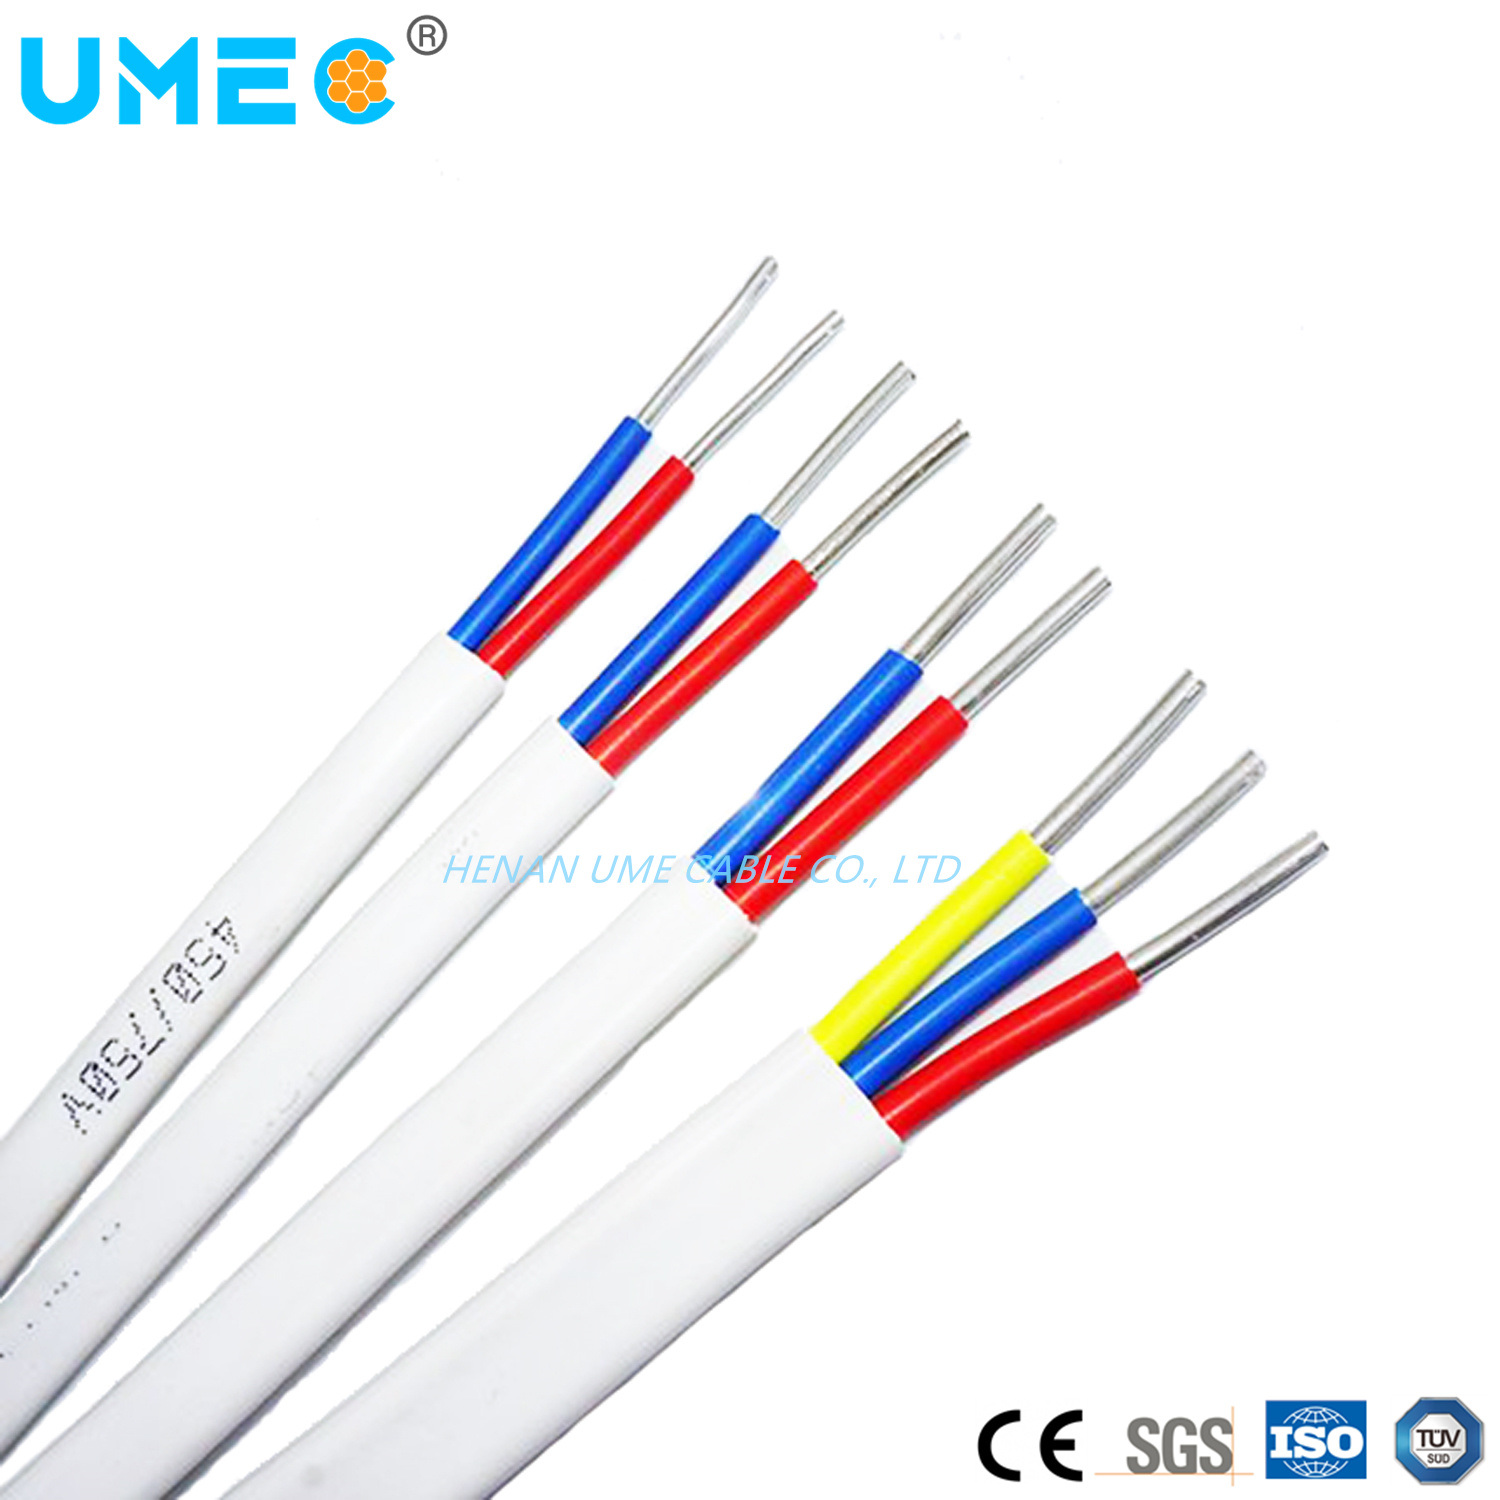 Low Voltage 450/750V IEC60227 Standard Flat PVC Insulated PVC Jacket Housing Wiring Wire